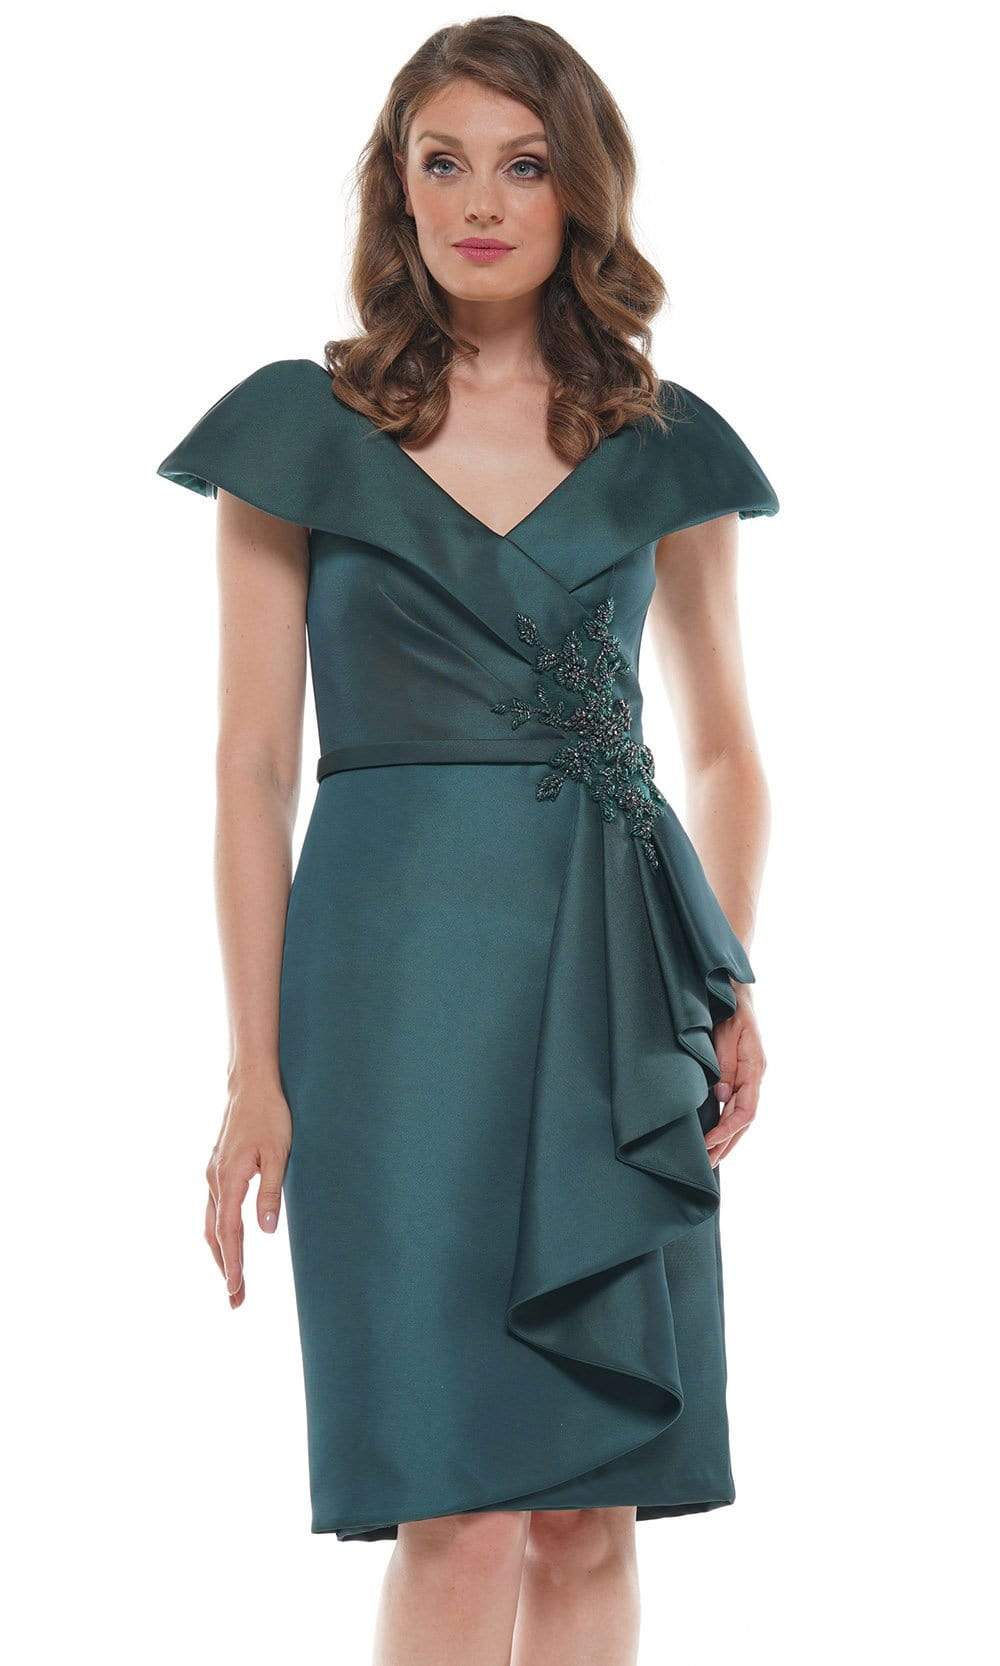 Marsoni by Colors - MV1106 Knee Length Ruffle Trimmed Sheath Dress Mother of the Bride Dresses 4 / Deep Green